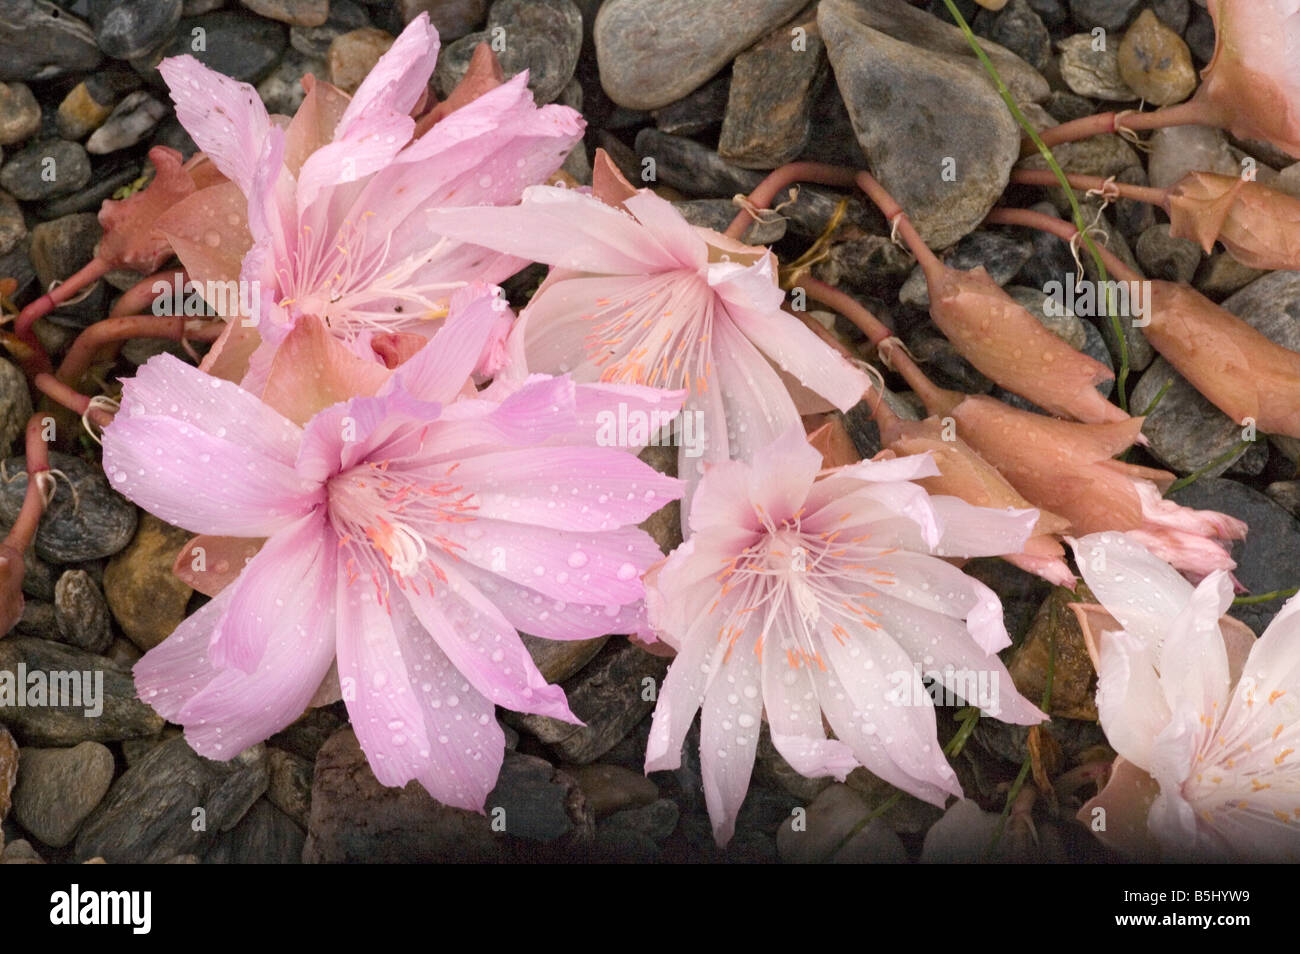 A Lewisia from the US Lewisia rediviva Stock Photo